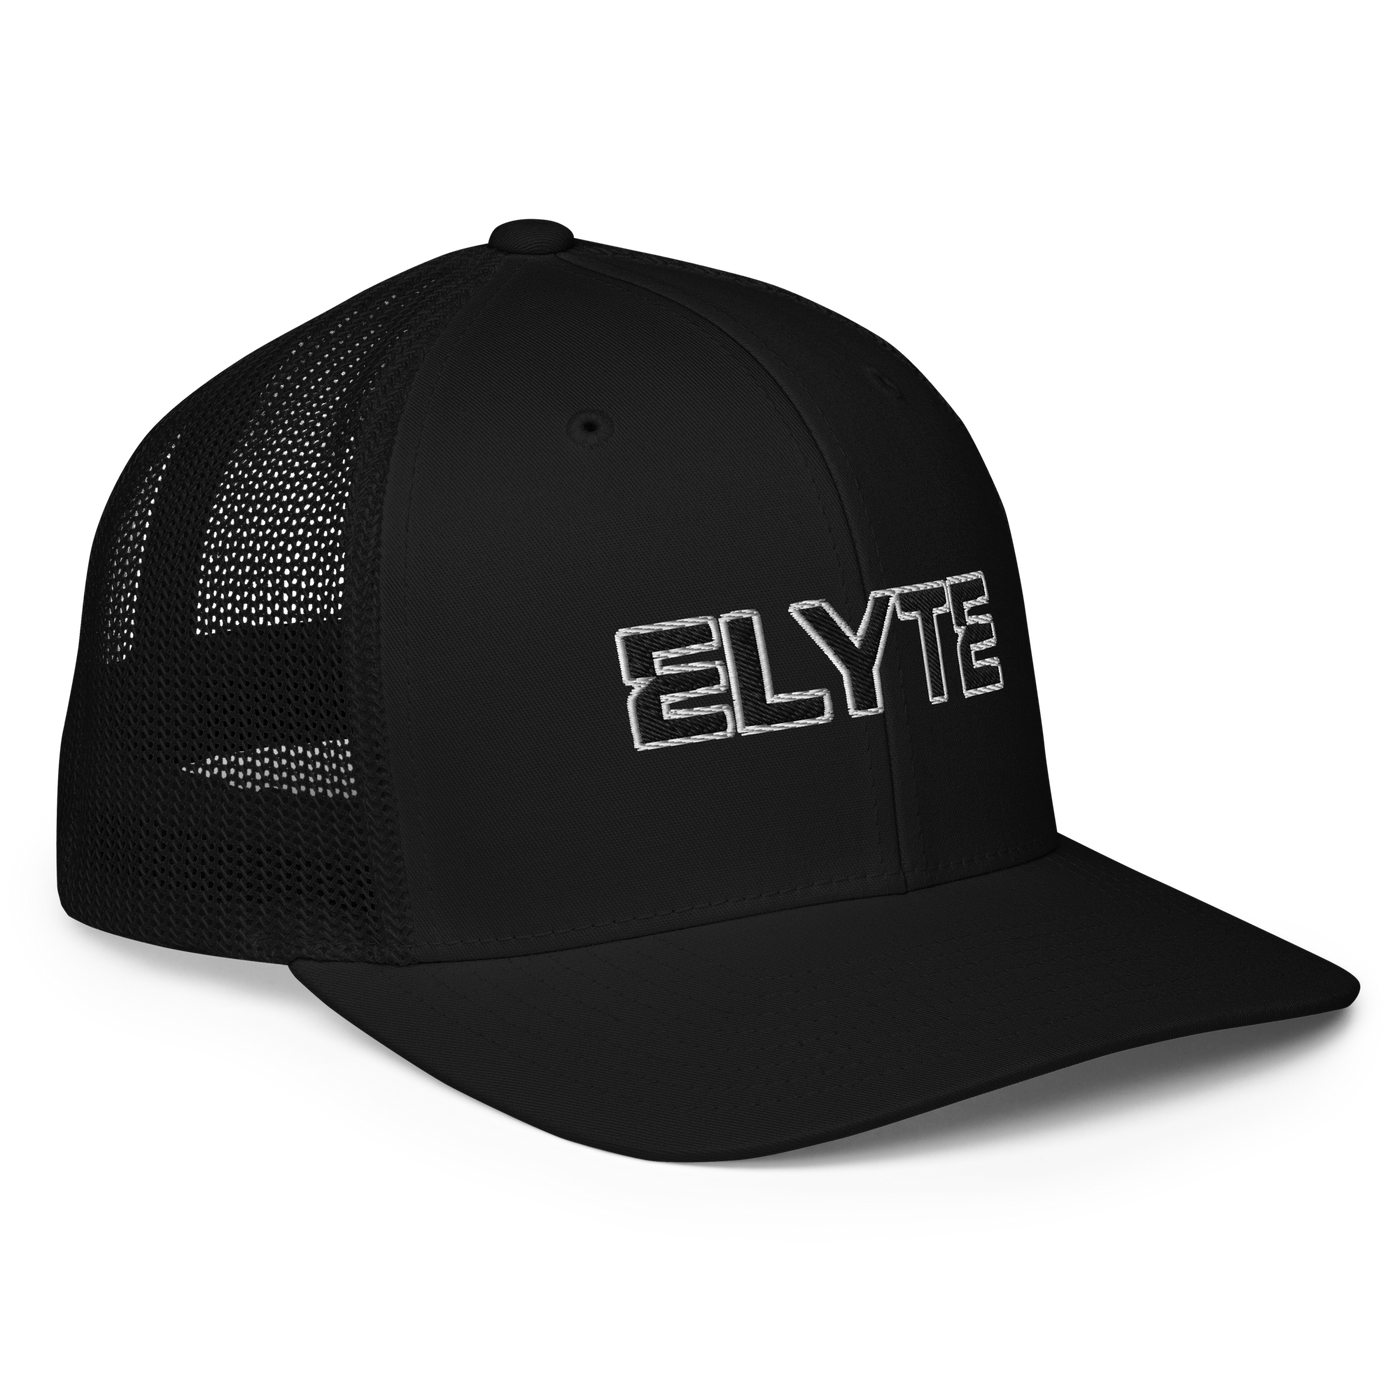 ELYTE Precision Fitted Trucker Cap